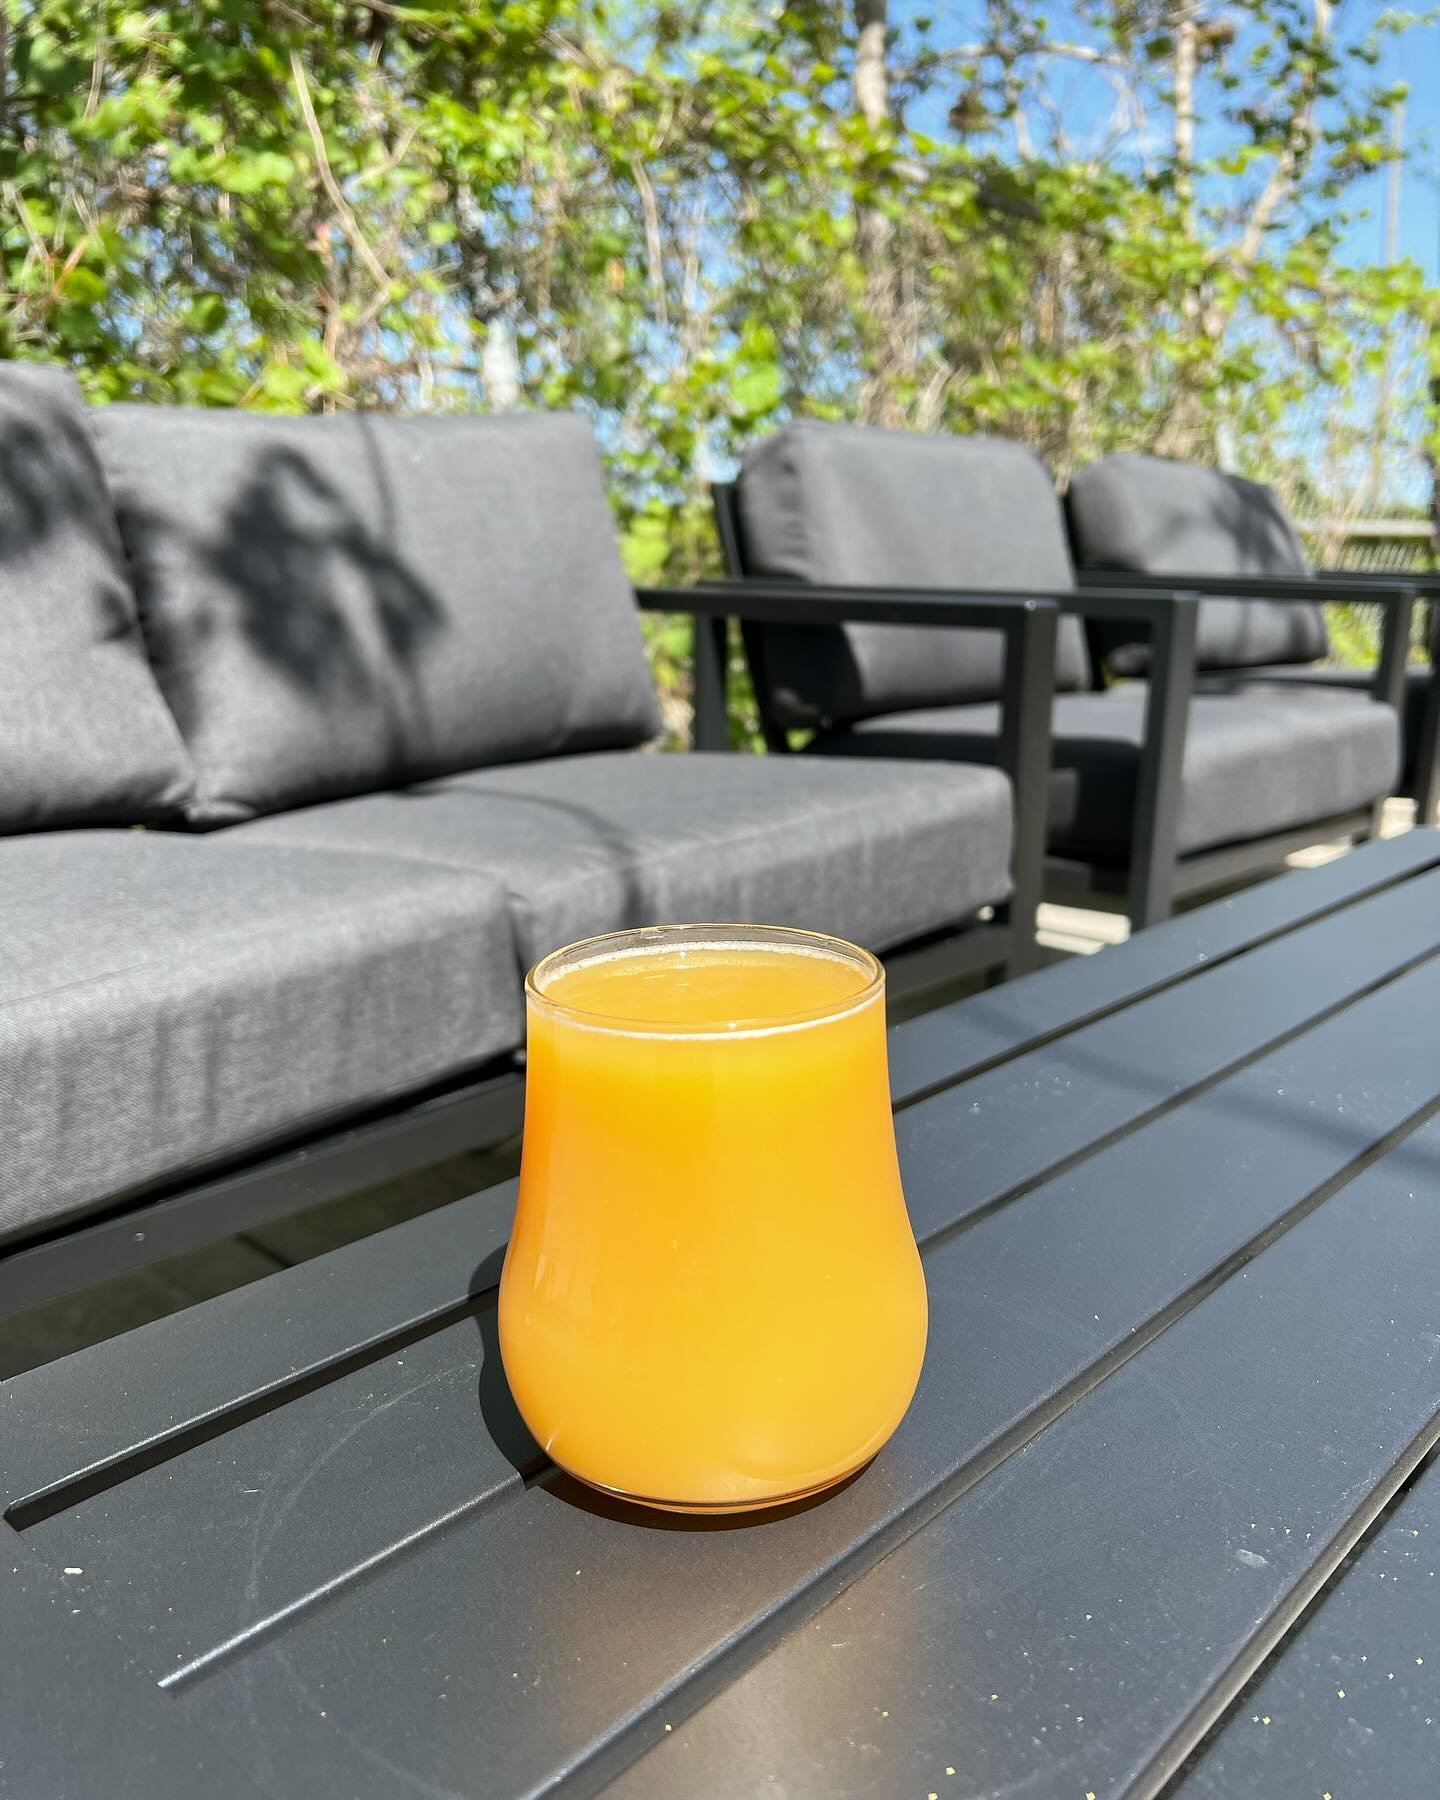 An extra juicy batch of Lounge Hours is back on tap today - this orange and mango sour is the perfect companion for relaxing on our new comfy patio furniture! Come catch some sun when we open at 4pm today.

We also have more Sun Jump Mexican lager ca